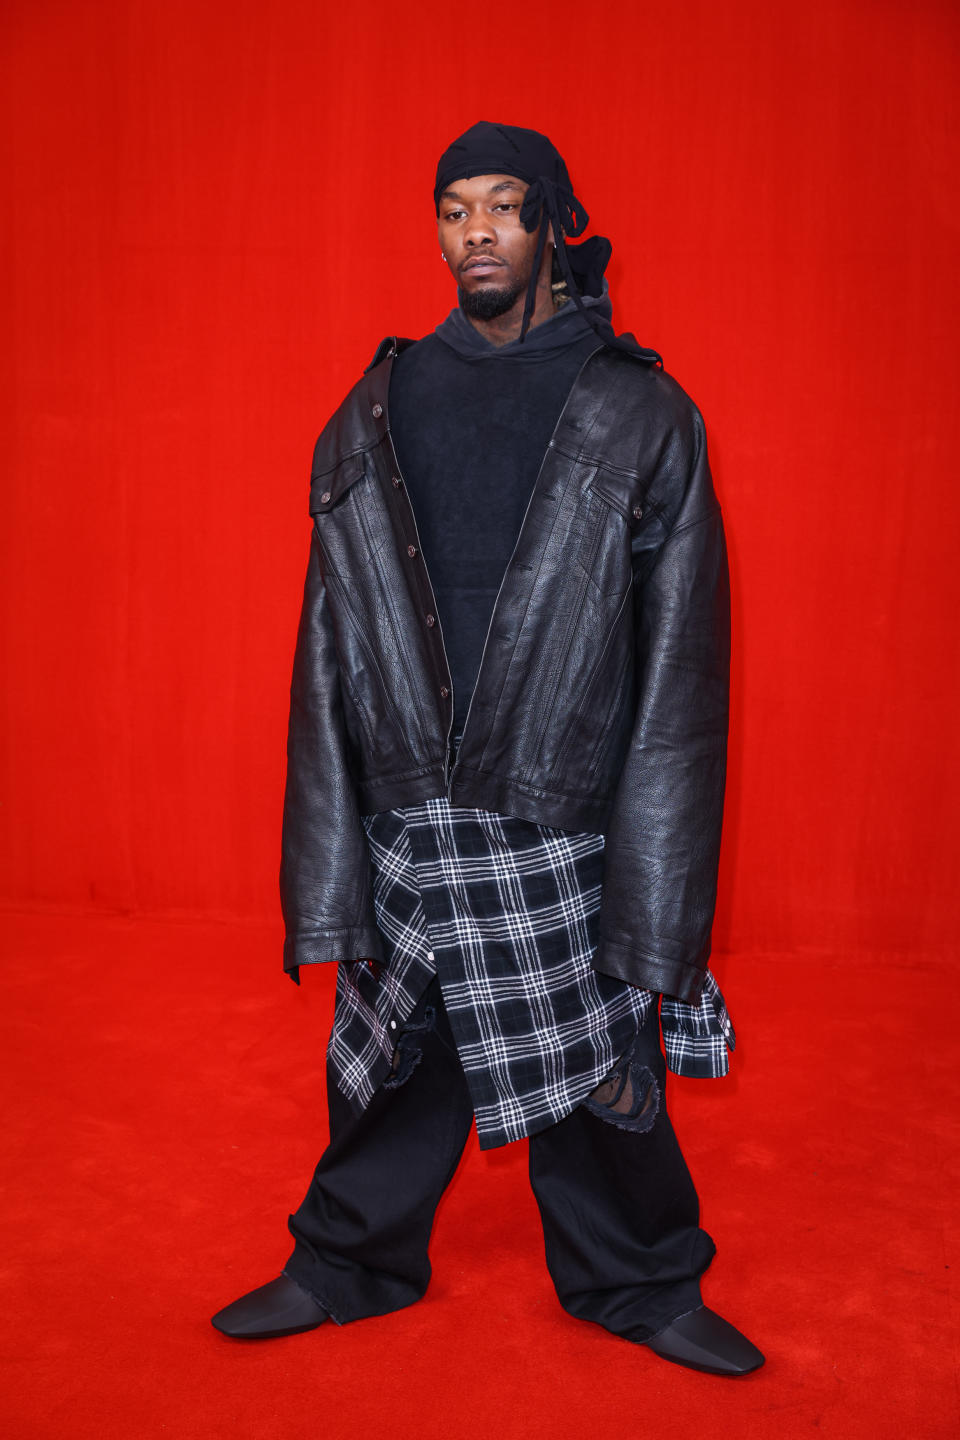 Rapper Offset poses on the runway during the Balenciaga Womenswear Spring/Summer 2022 show as part of Paris Fashion Week at Theatre Du Chatelet on October 02, 2021 in Paris, France. - Credit: Richard Bord/Getty Images